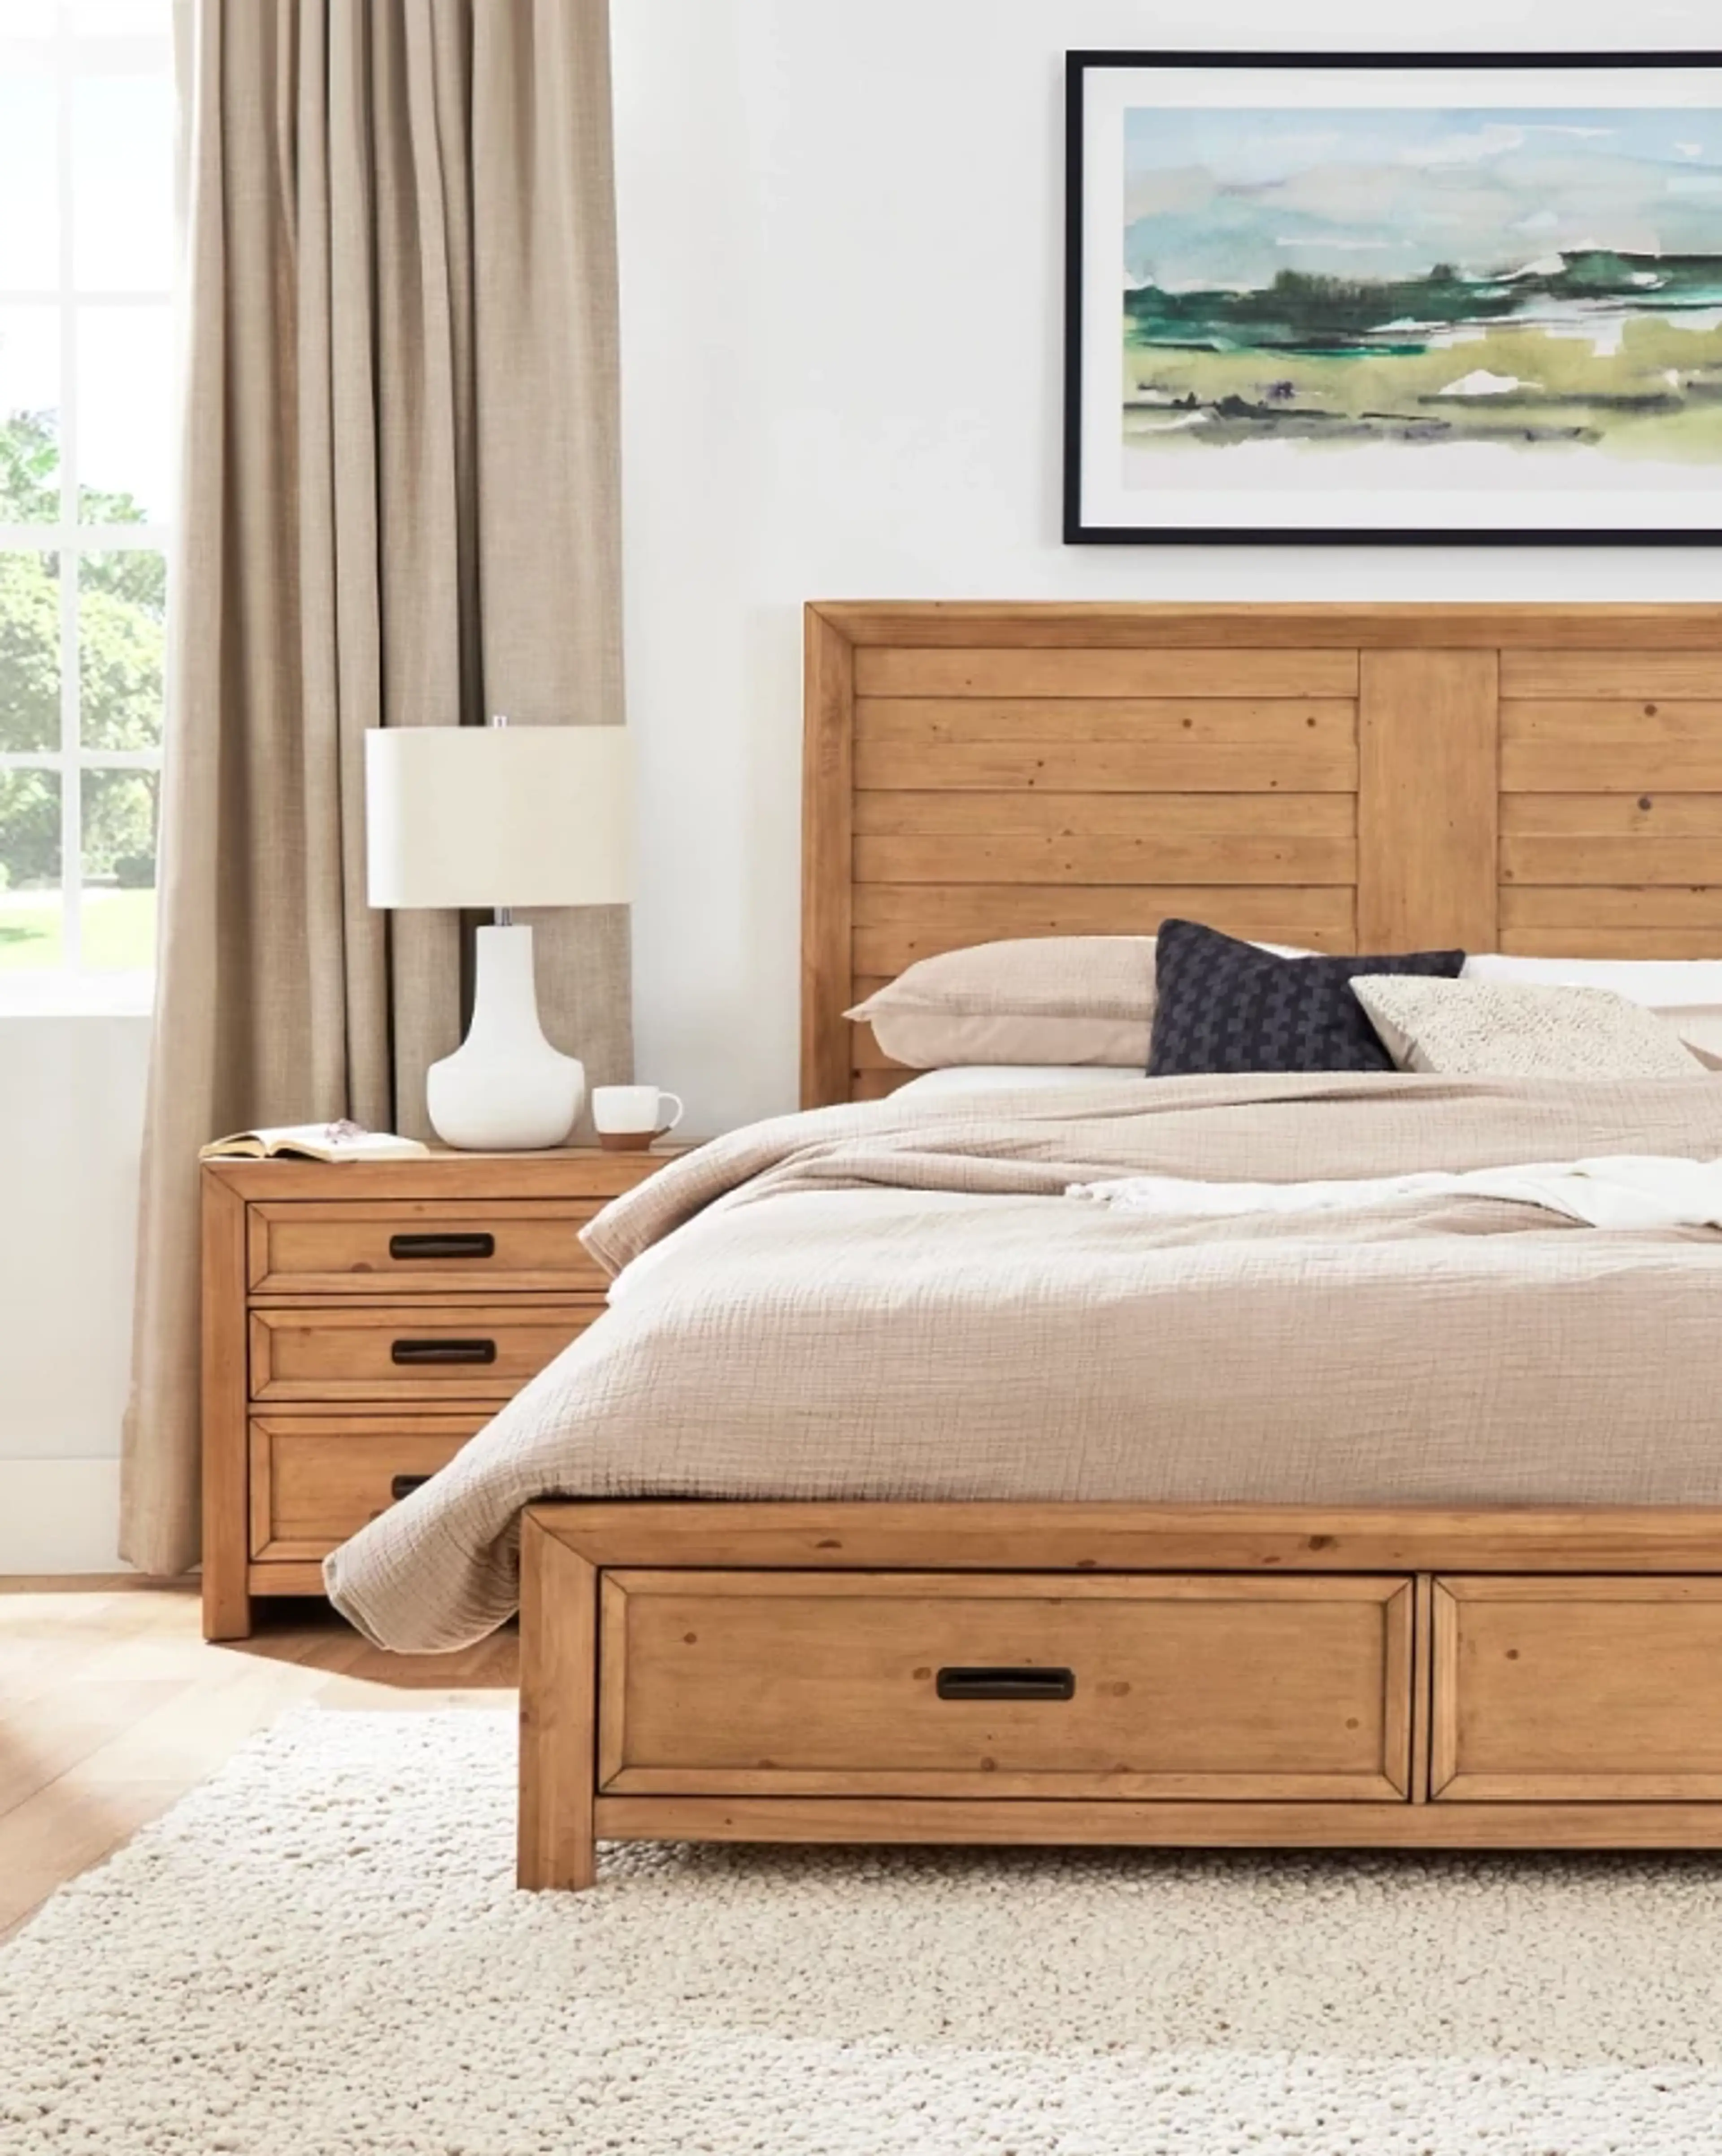 Choosing the Right Dresser and Nightstand: Balancing Style, Storage, and Comfort